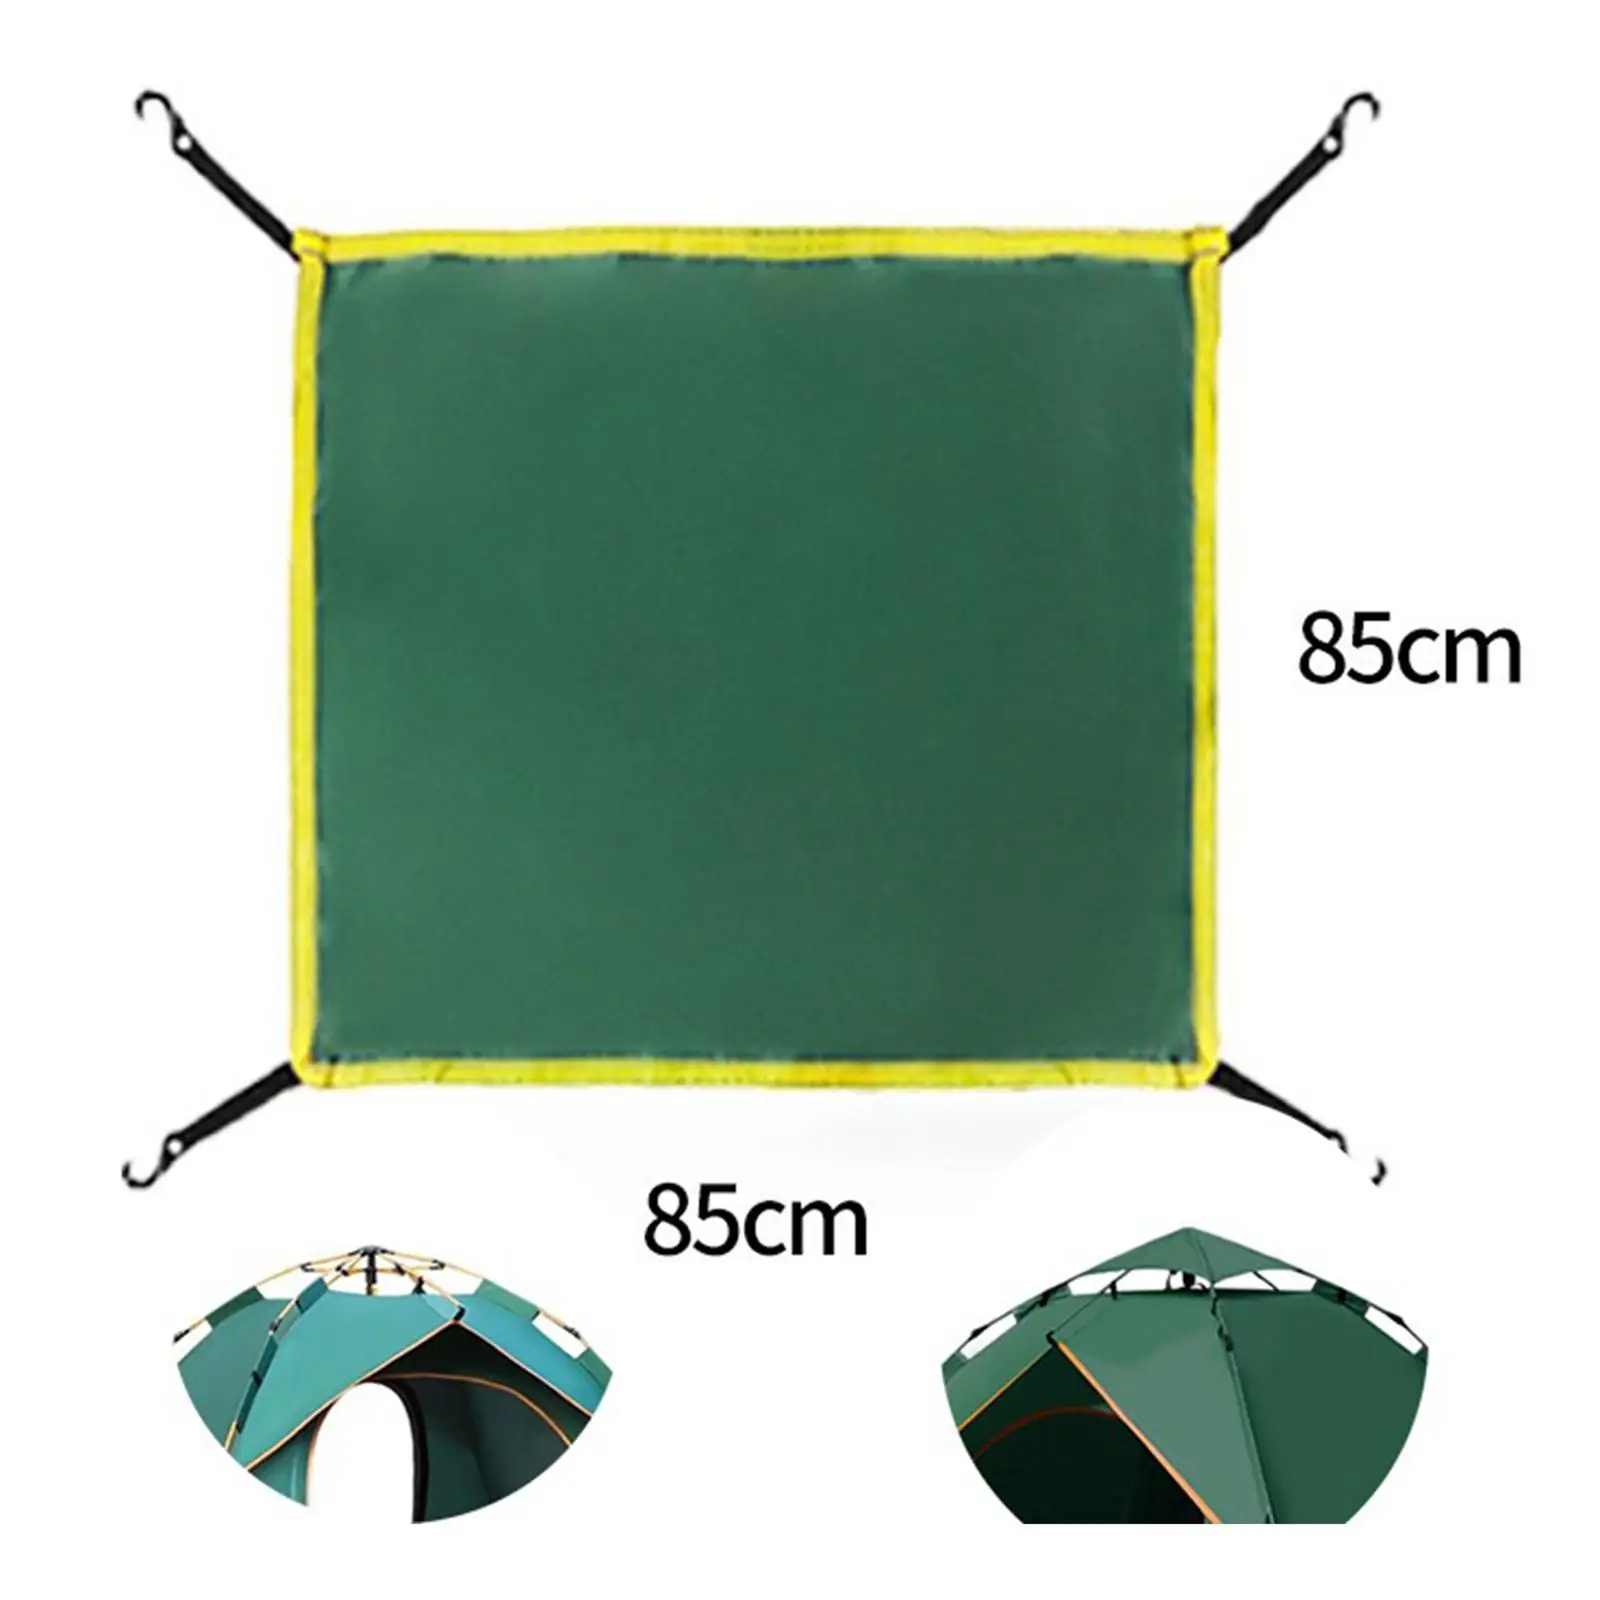 Canopy Tent Top Cover Tent Tarp Rain Cover Sunproof Fits 3-4 Person Instant Tent Dome Tent Cover for Outdoor Camping